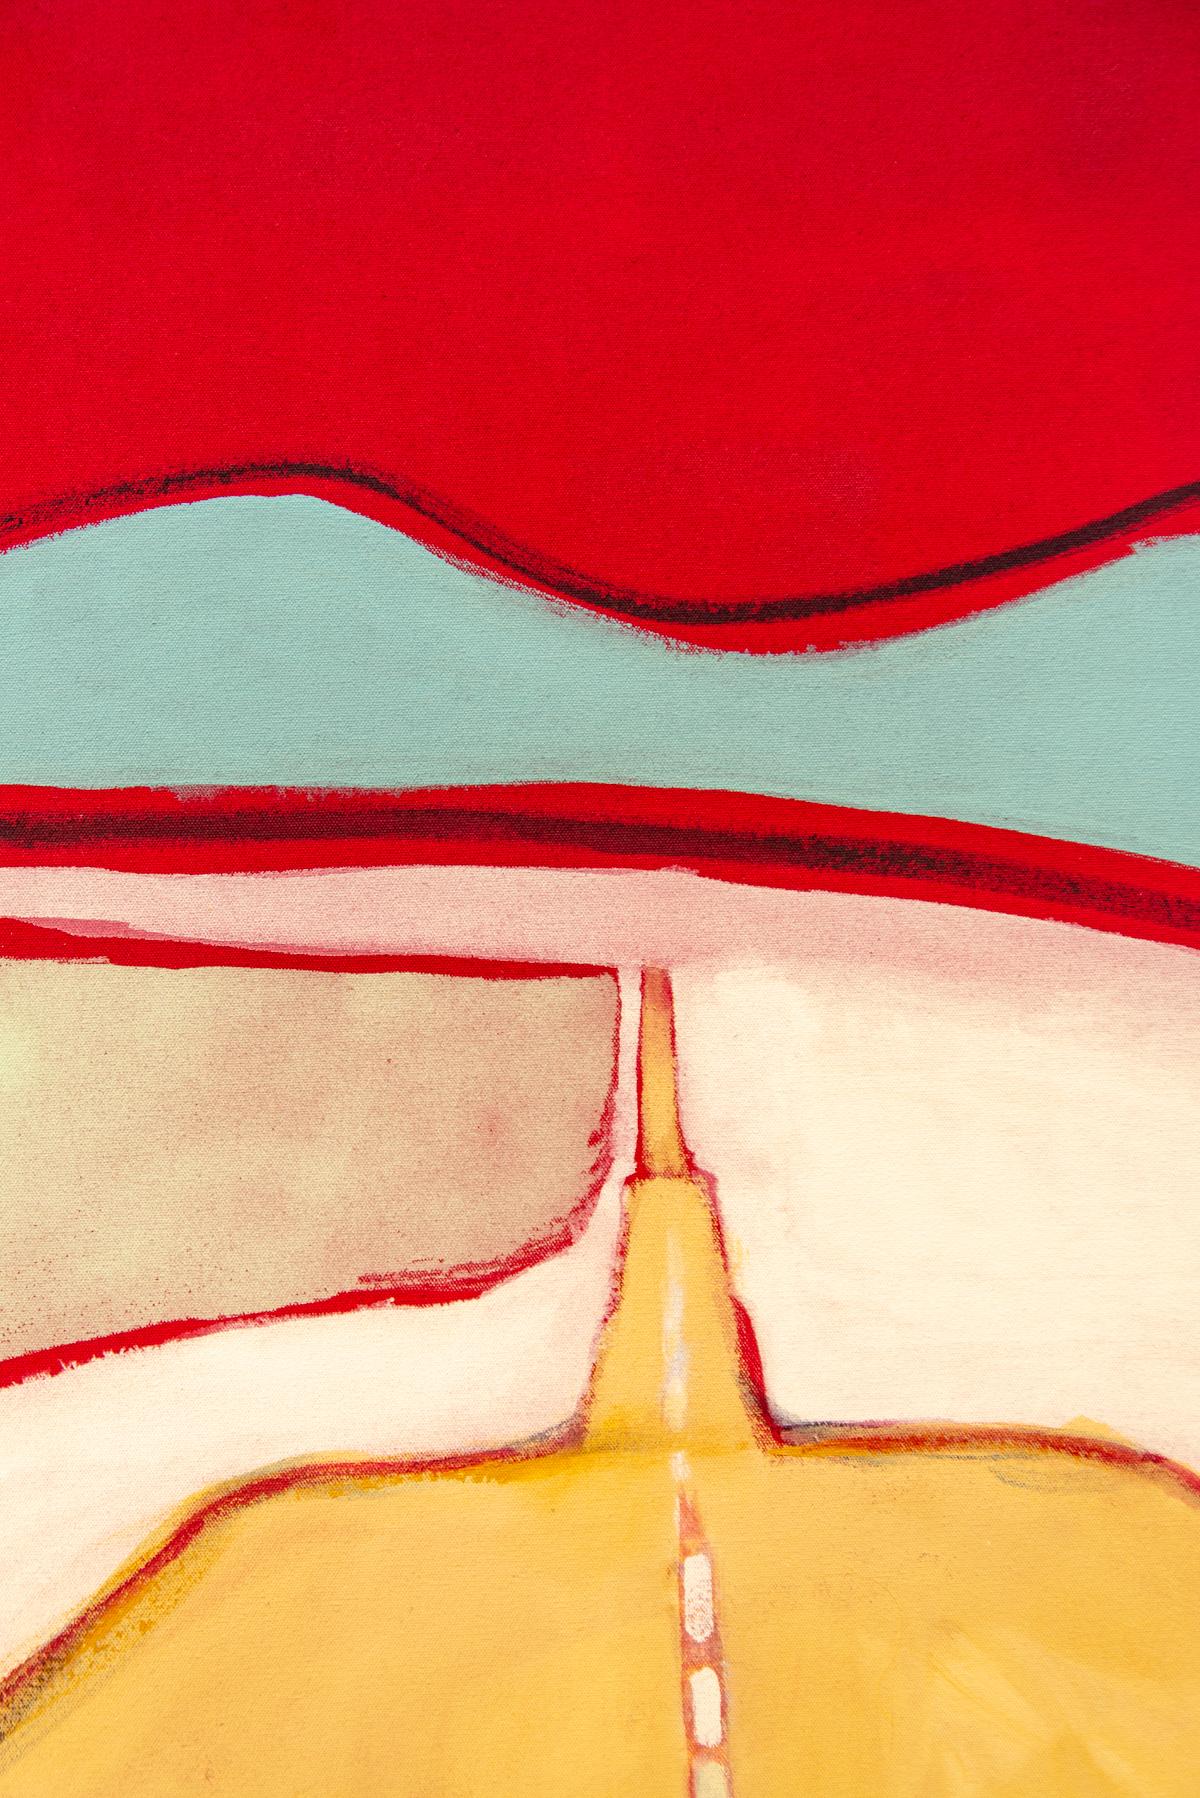 Big Red Trip - large, bright, colorful, abstracted landscape, acrylic on canvas For Sale 3